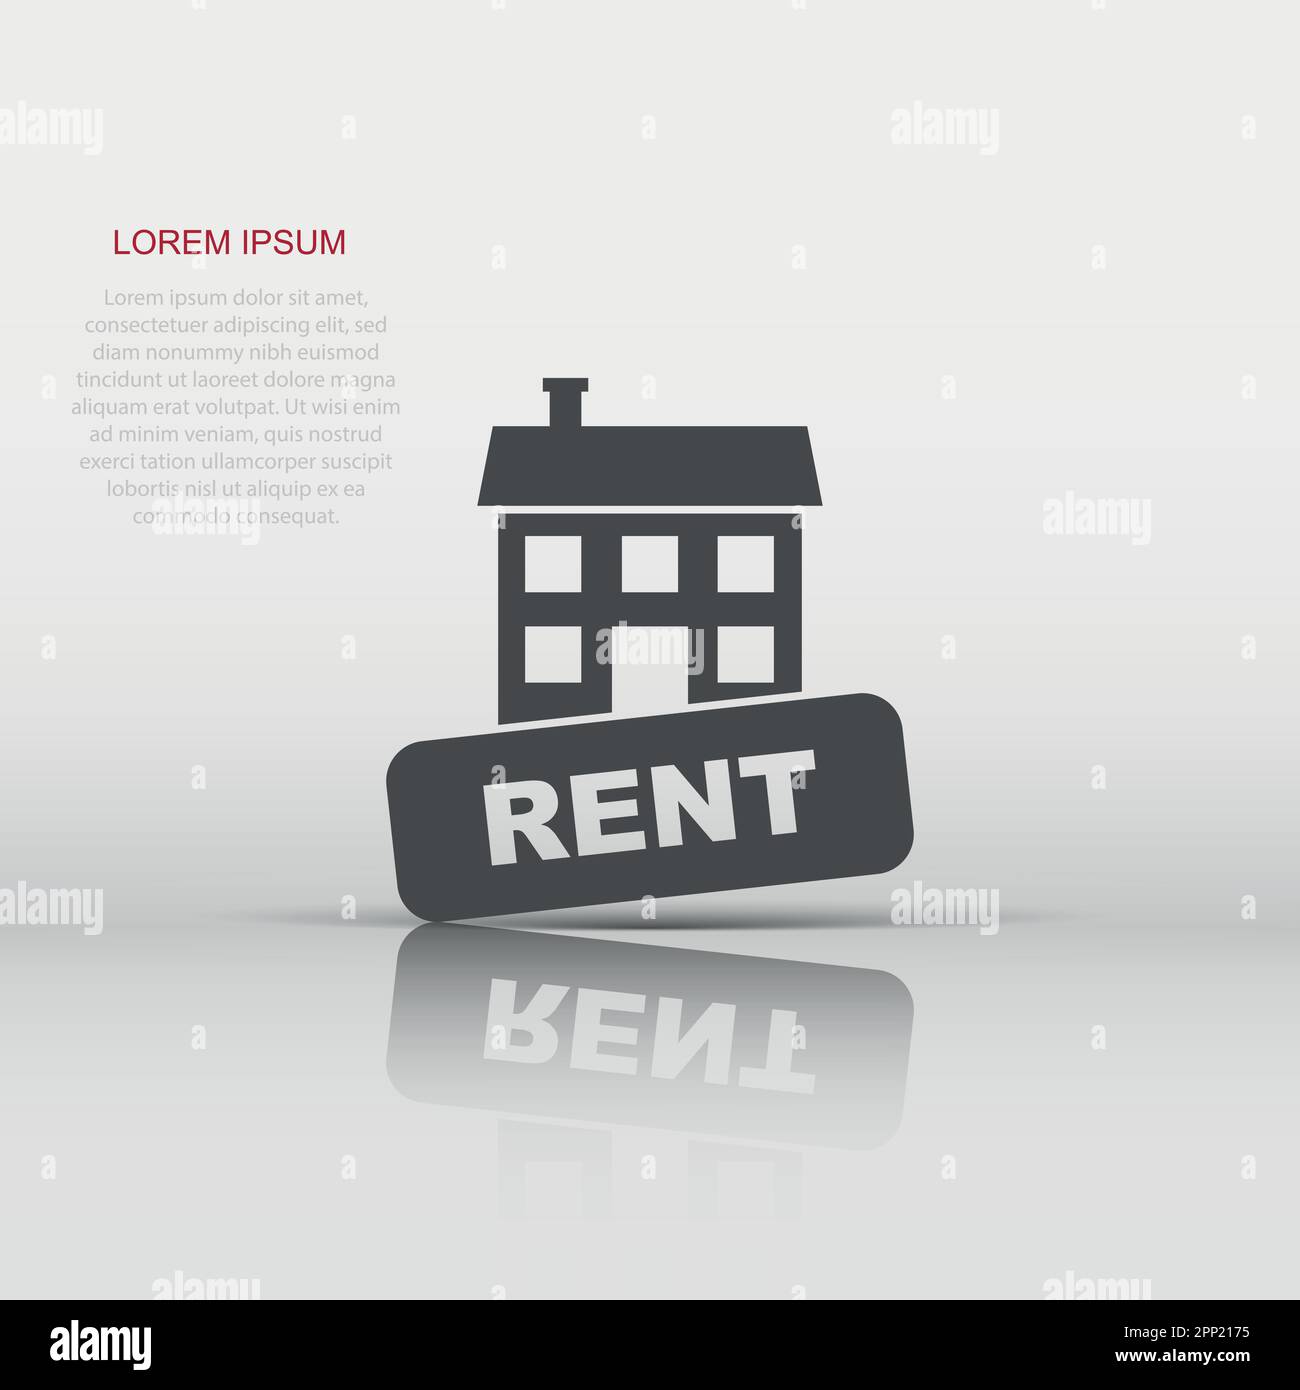 Vector rent house icon in flat style. Rent sign illustration pictogram. Rental business concept. Stock Vector